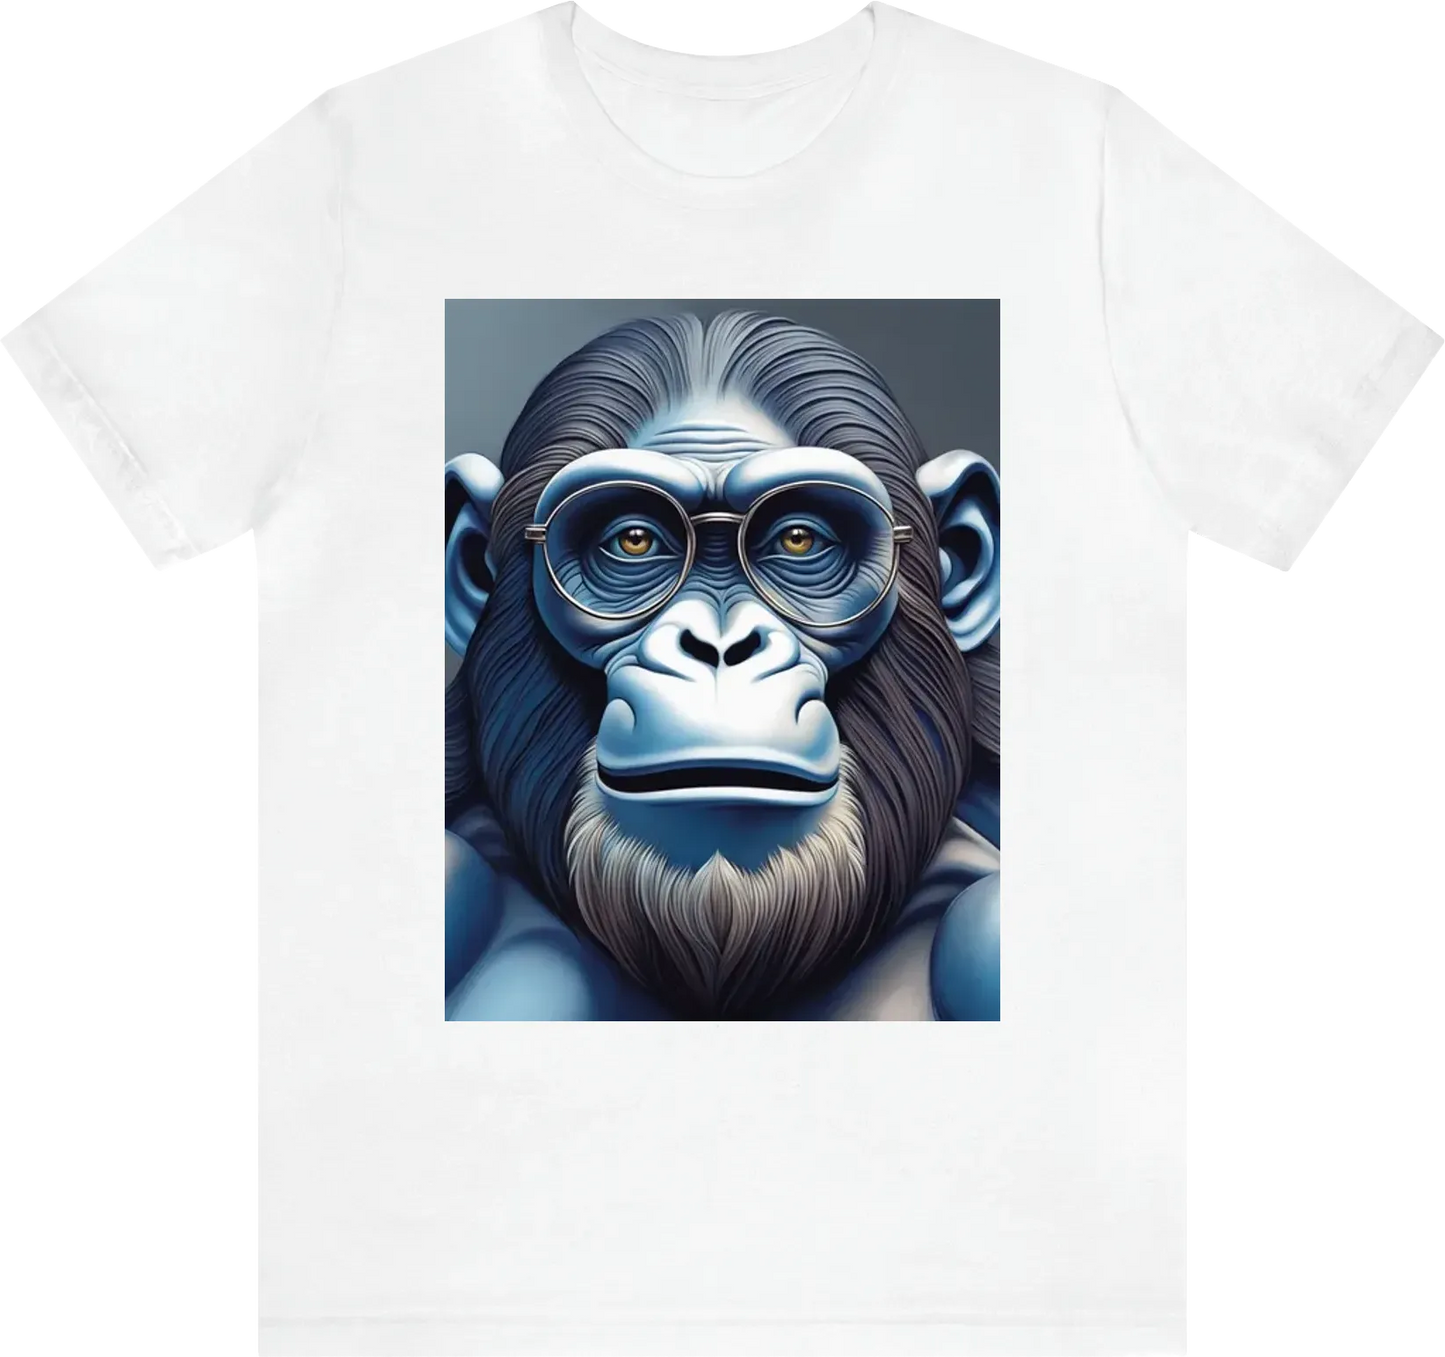 A face of an ape for a brand named "the good ape". It wears round glasses, smiles with teeth, has a parting in his long hair in the middle of its head, blue eyes